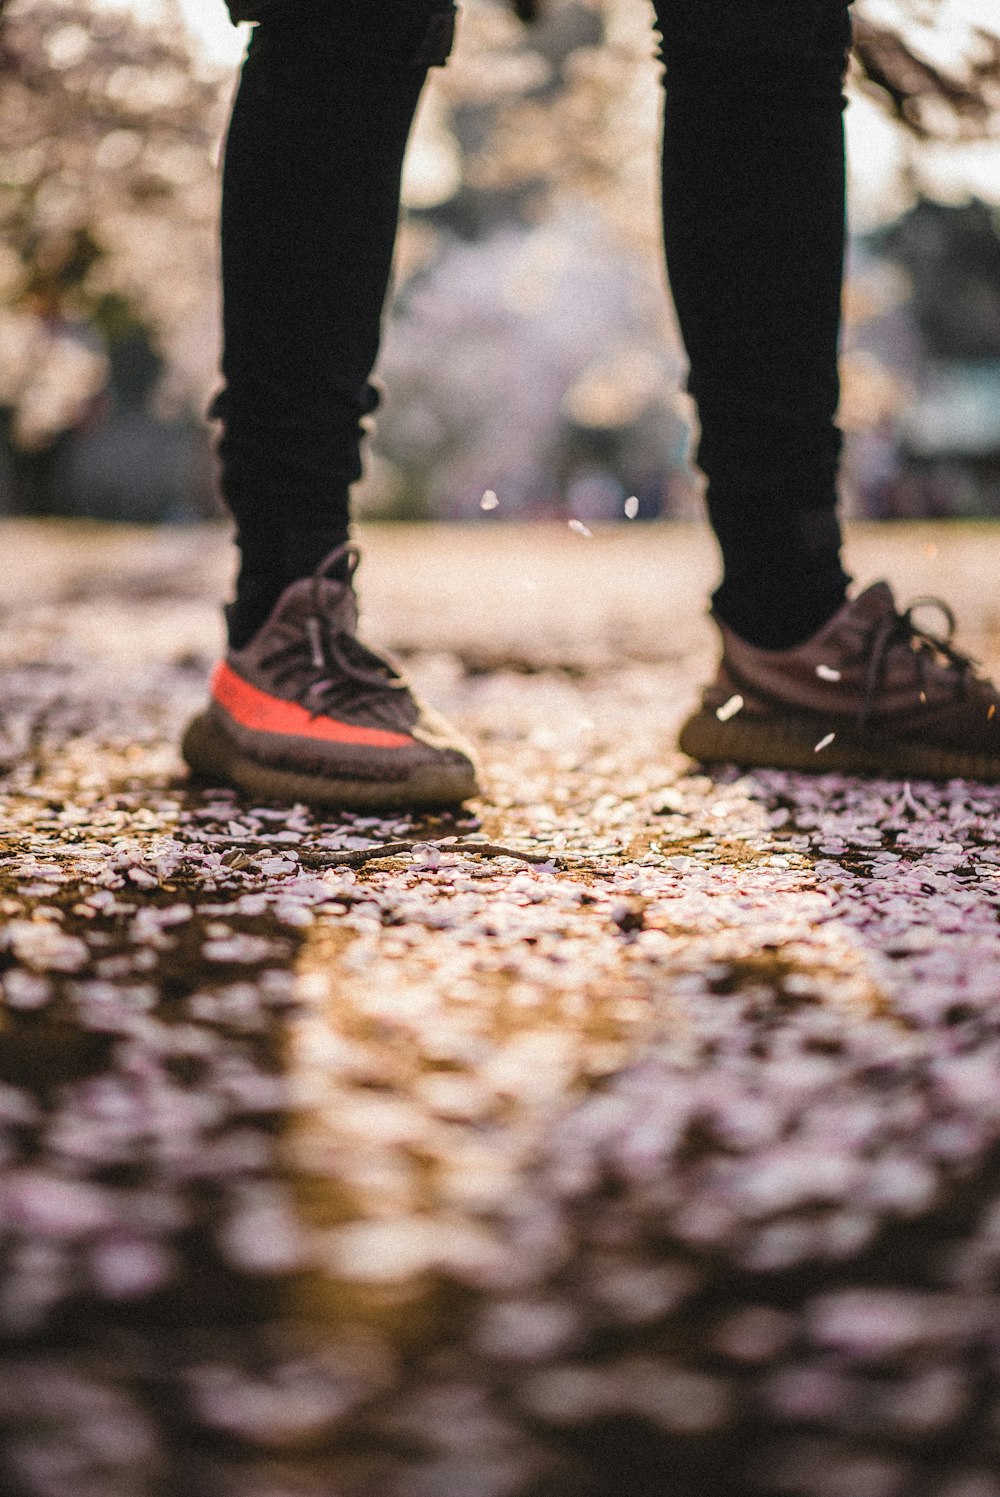 person wearing black-and-red adidas Yeezy Boost 350 v2 sneakers photo –  Free Feet Image on Unsplash